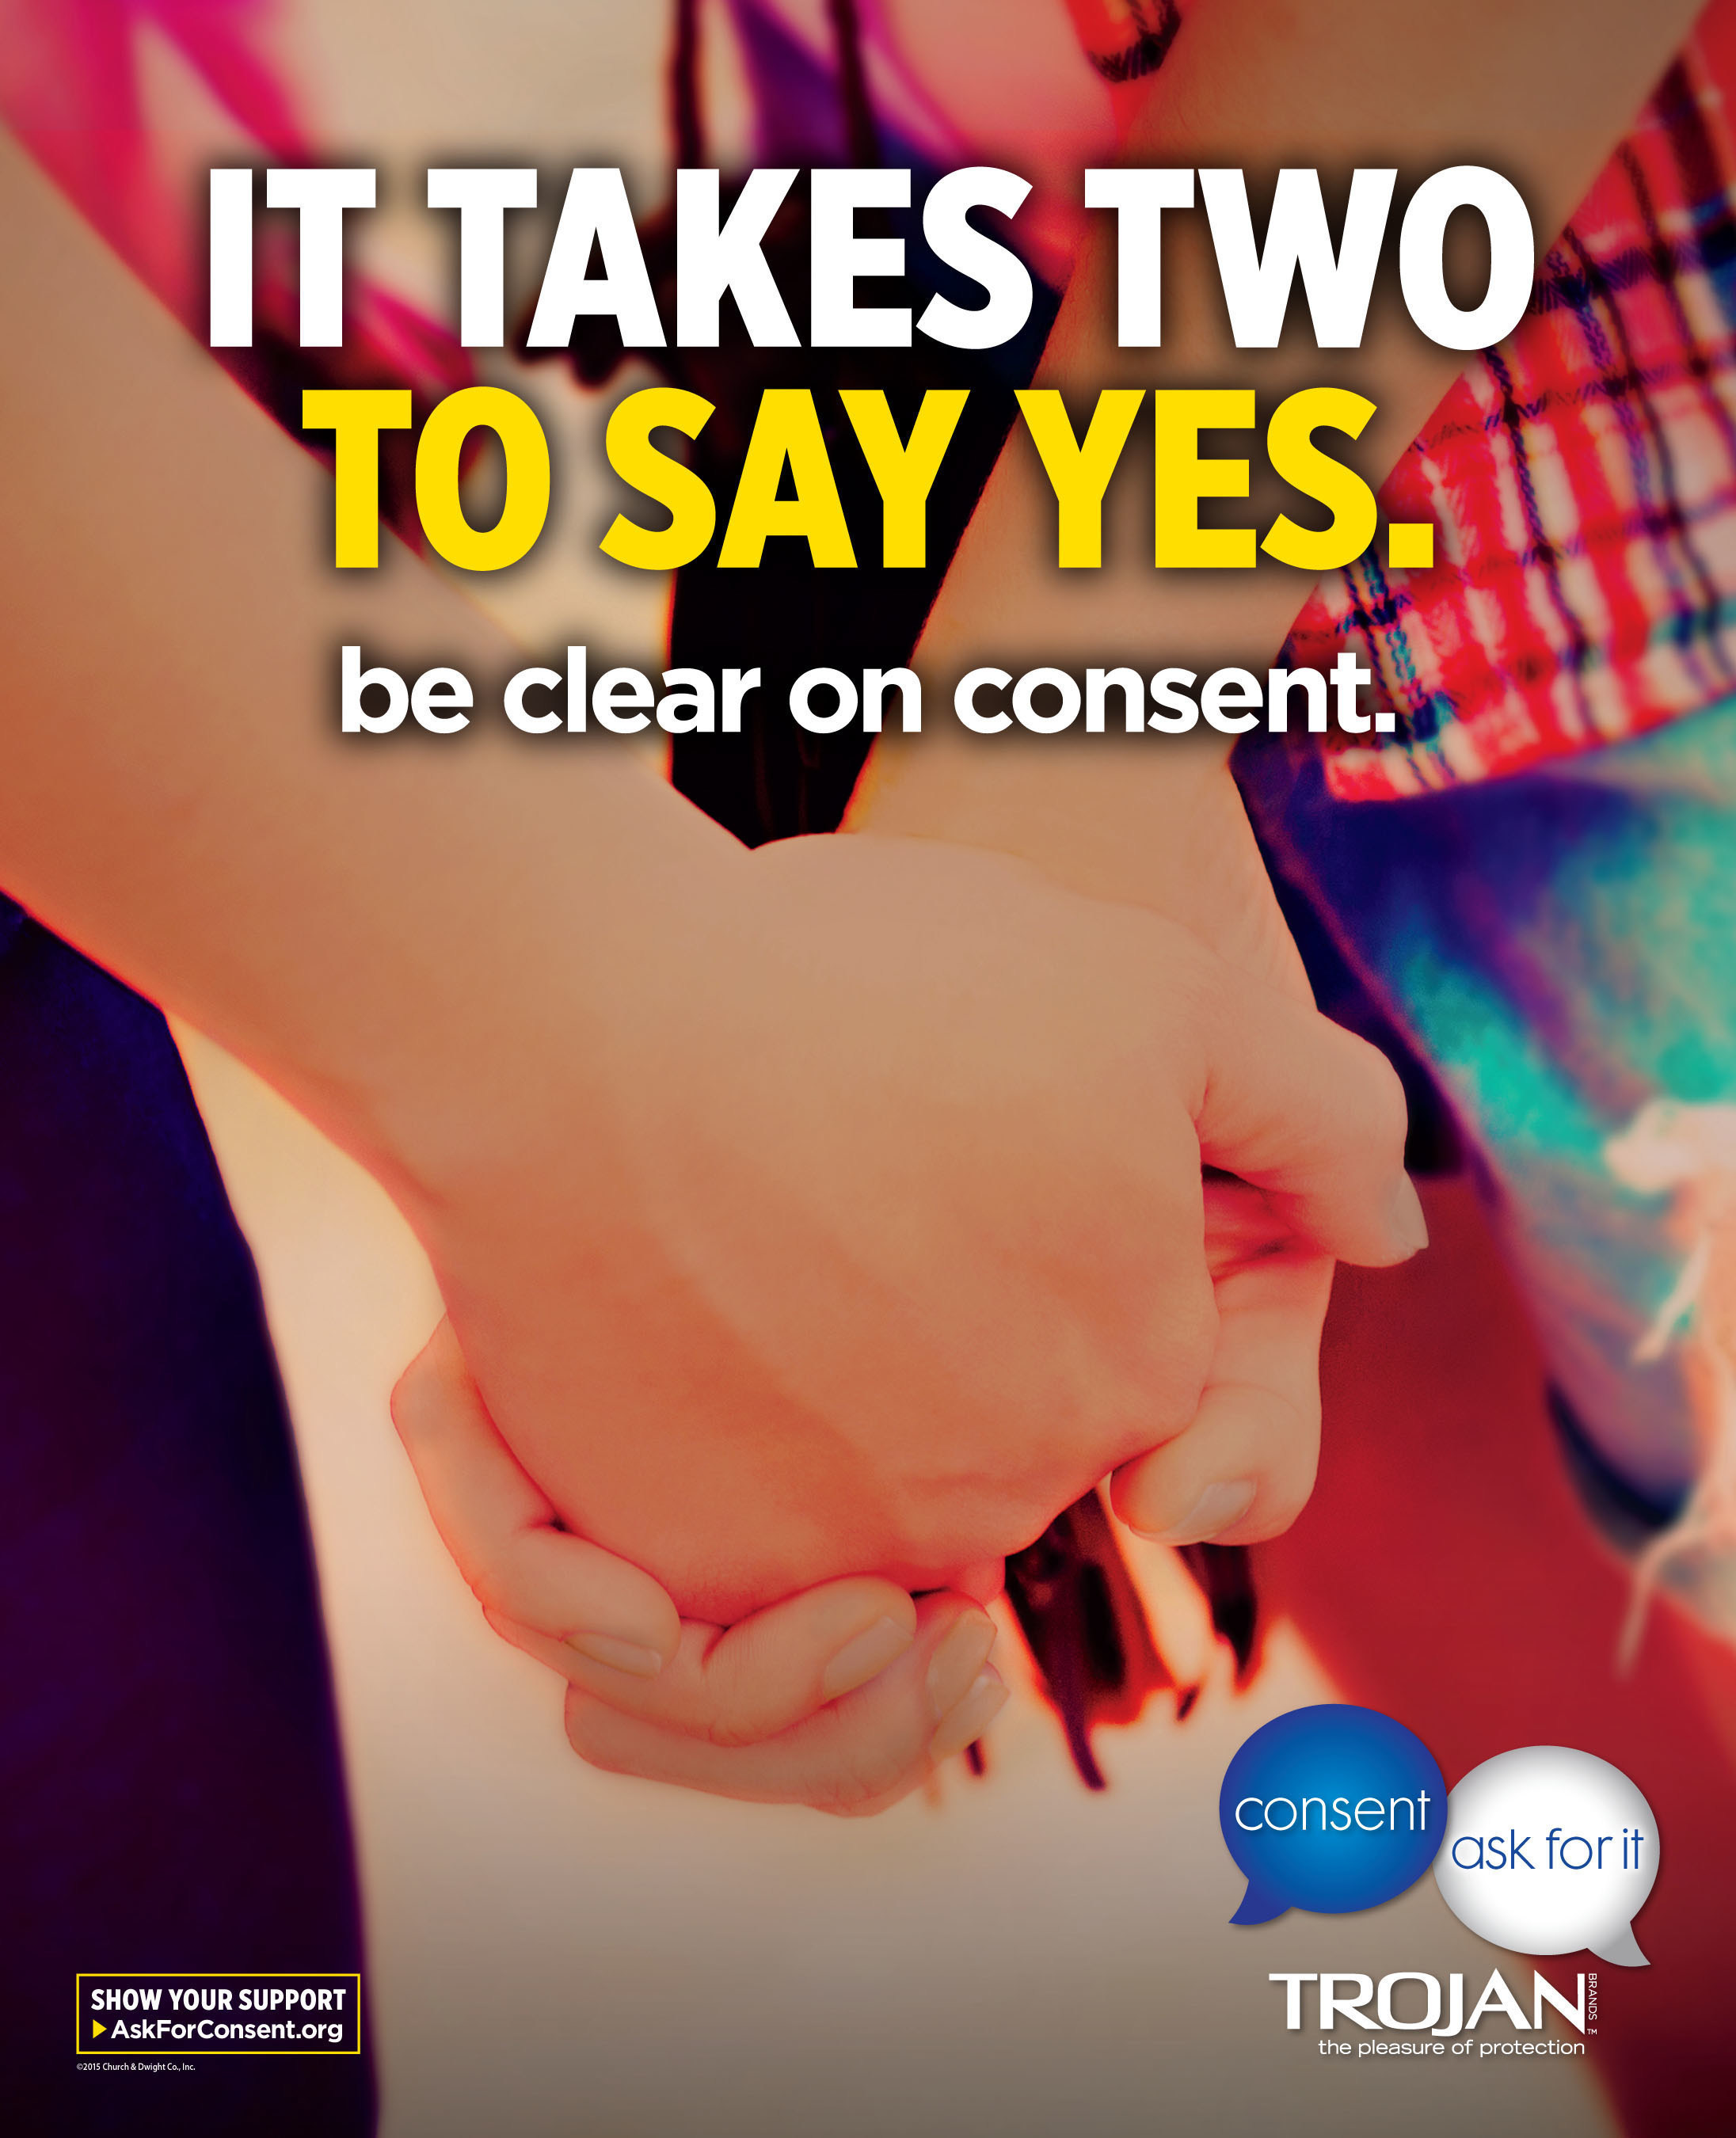 To download "Consent. Ask For It" posters, visit www.askforconsent.org